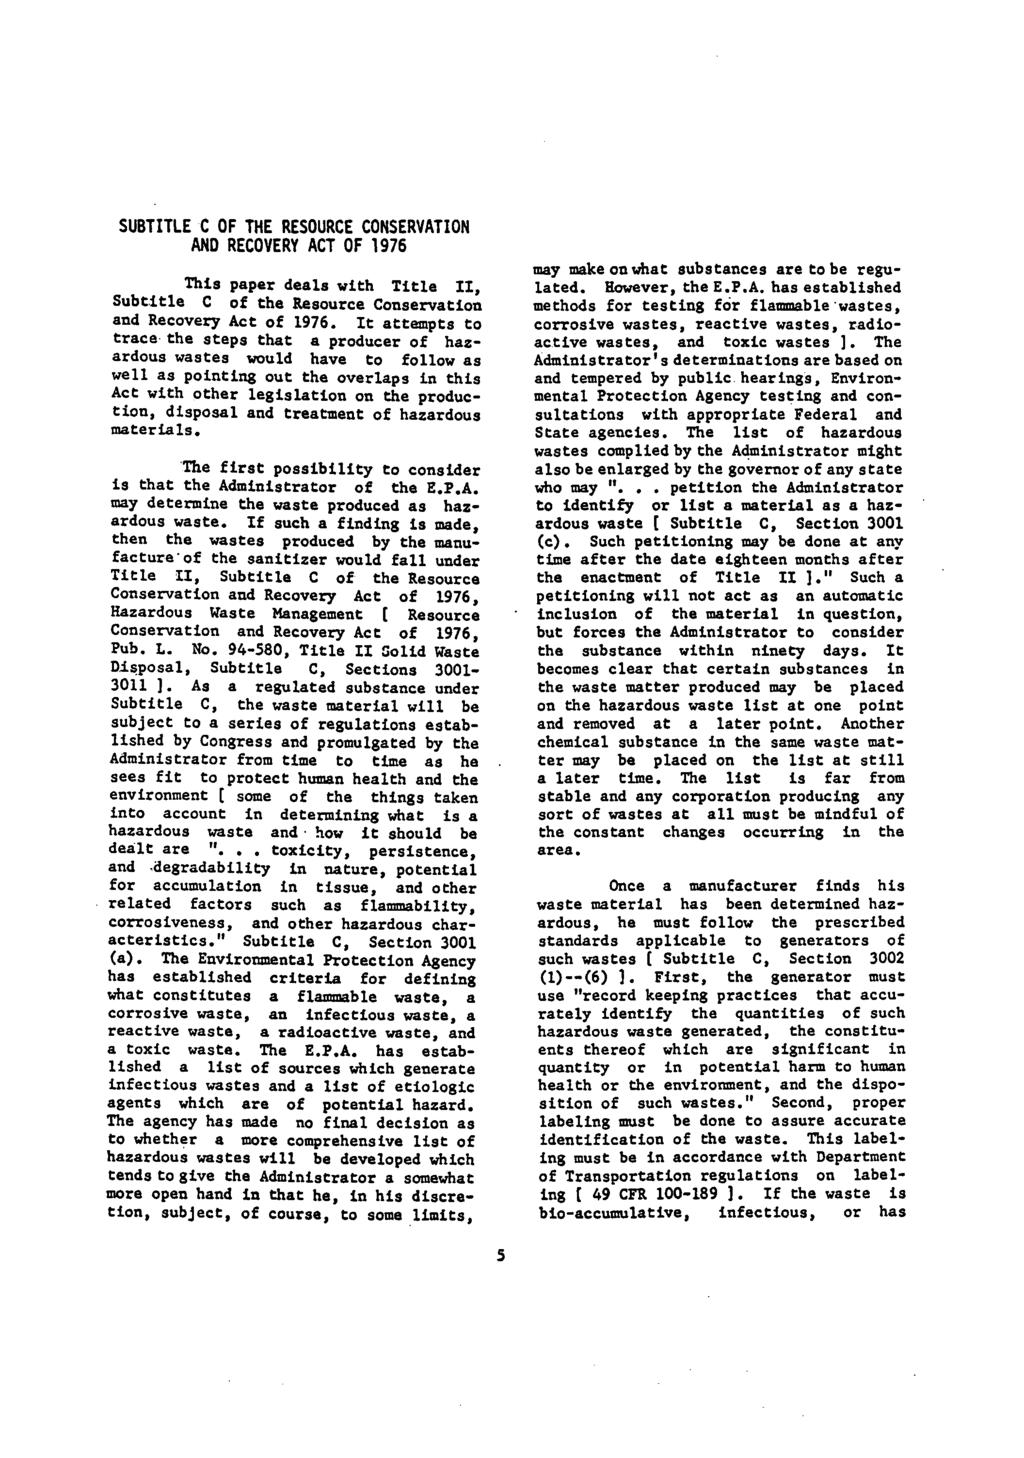 SUBTITLE C OF THE RESOURCE CONSERVATION AND RECOVERY ACT OF 1976 This paper deals with Title II, Subtitle C of the Resource Conservation and Recovery Act of 1976.